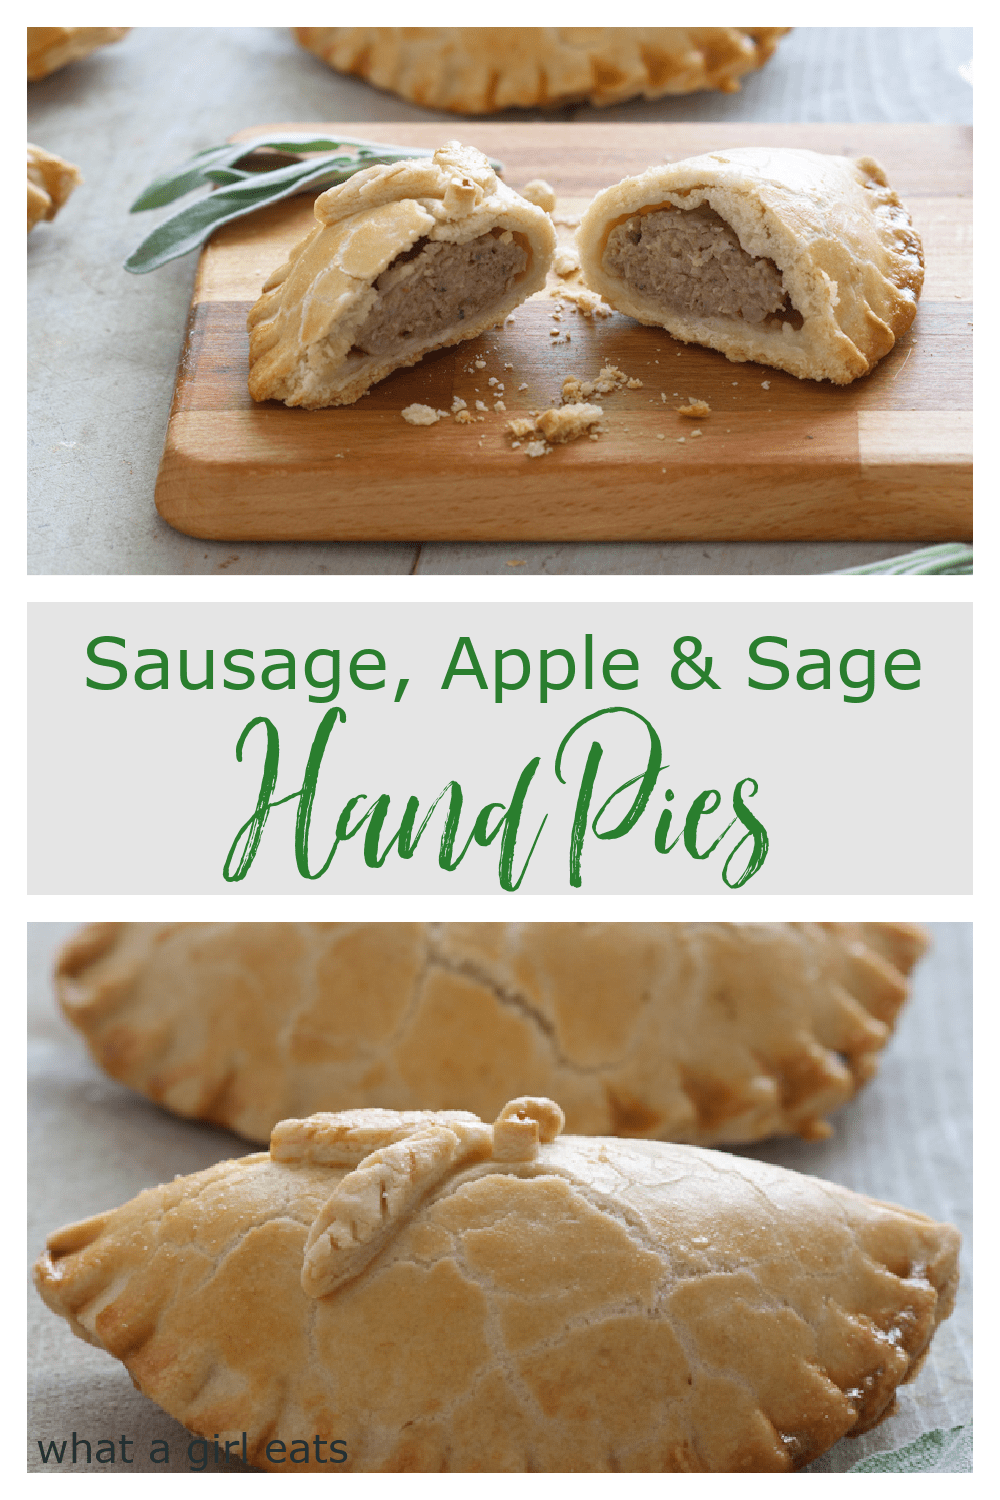 Savory hand pies are filled with moist pork, apple, and sage then wrapped in flaky homemade pastry, for a delicious grab-and-go snack